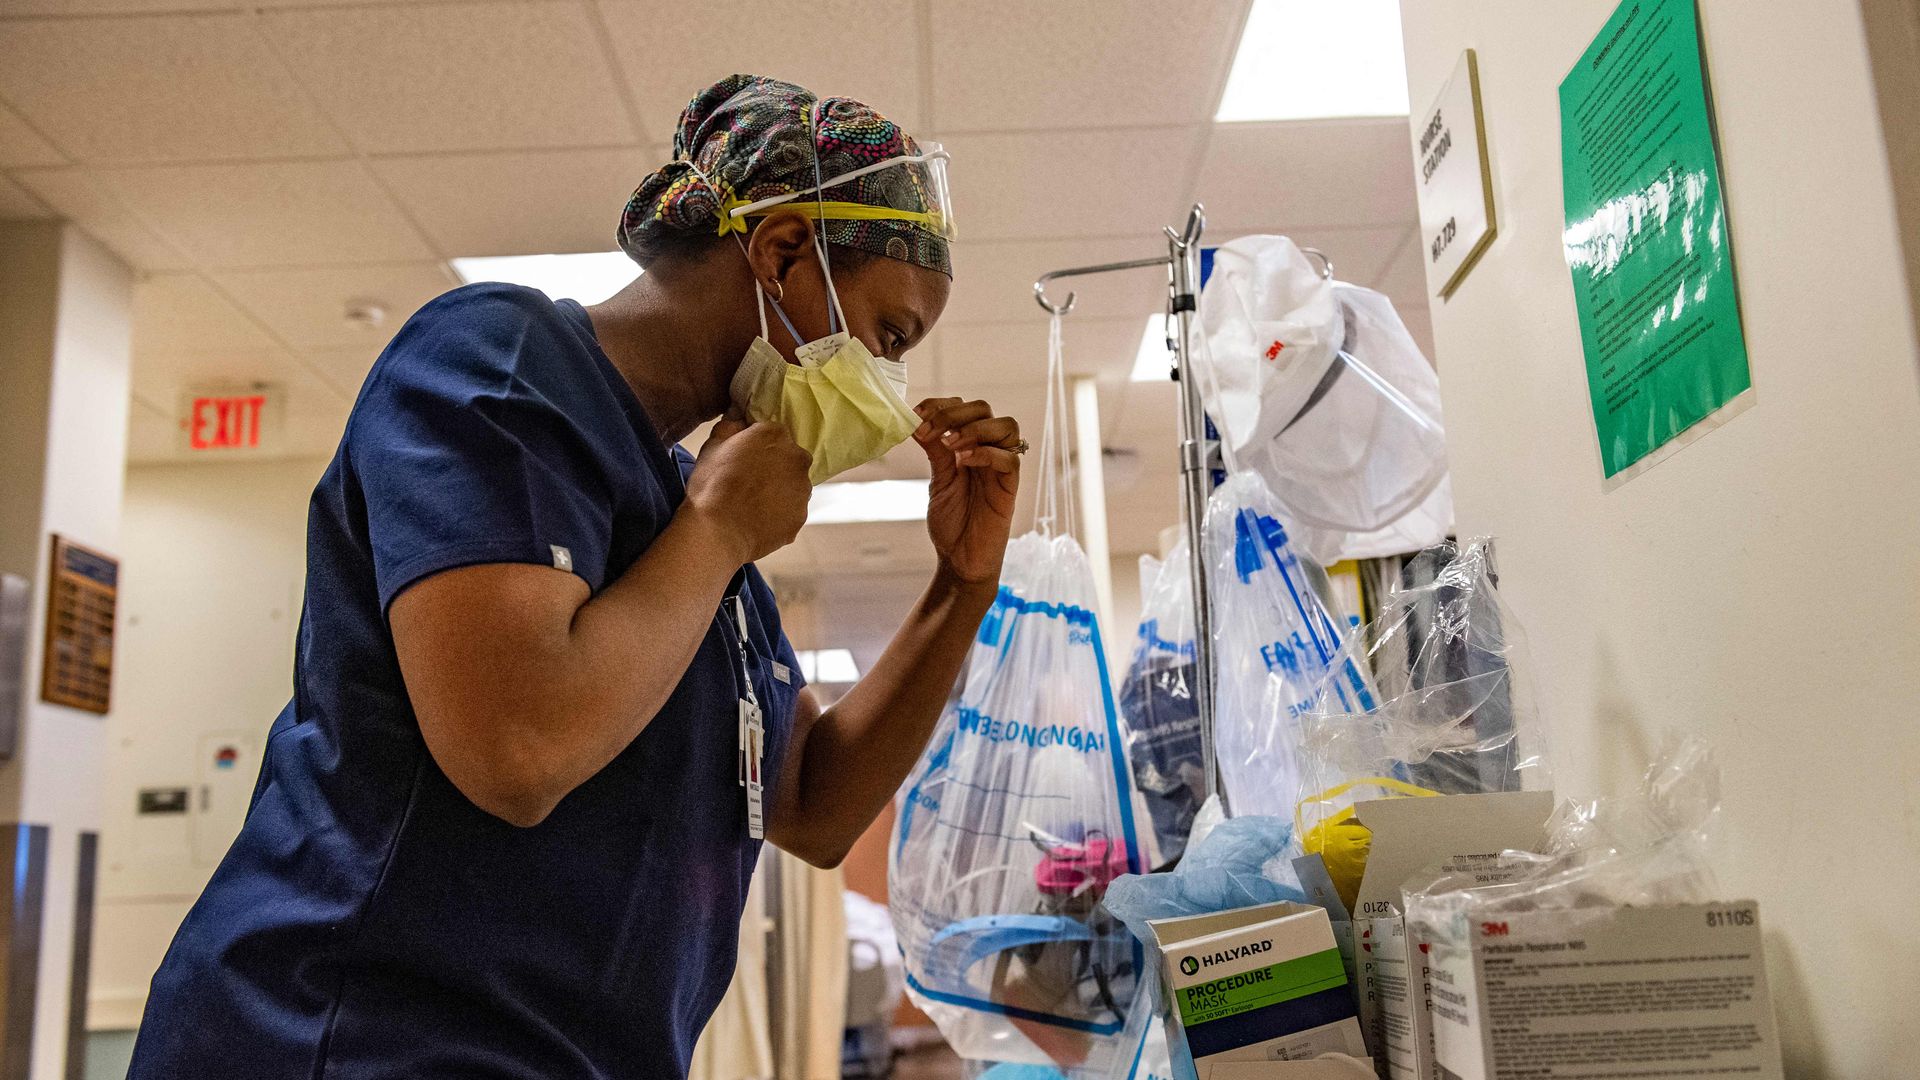 A medical workers puts on a maskbefore entering a negative pressure room with a Covid-19 patient in the ICU ward at UMass Memorial Medical Center in Worcester, Massachusetts on January 4, 2022